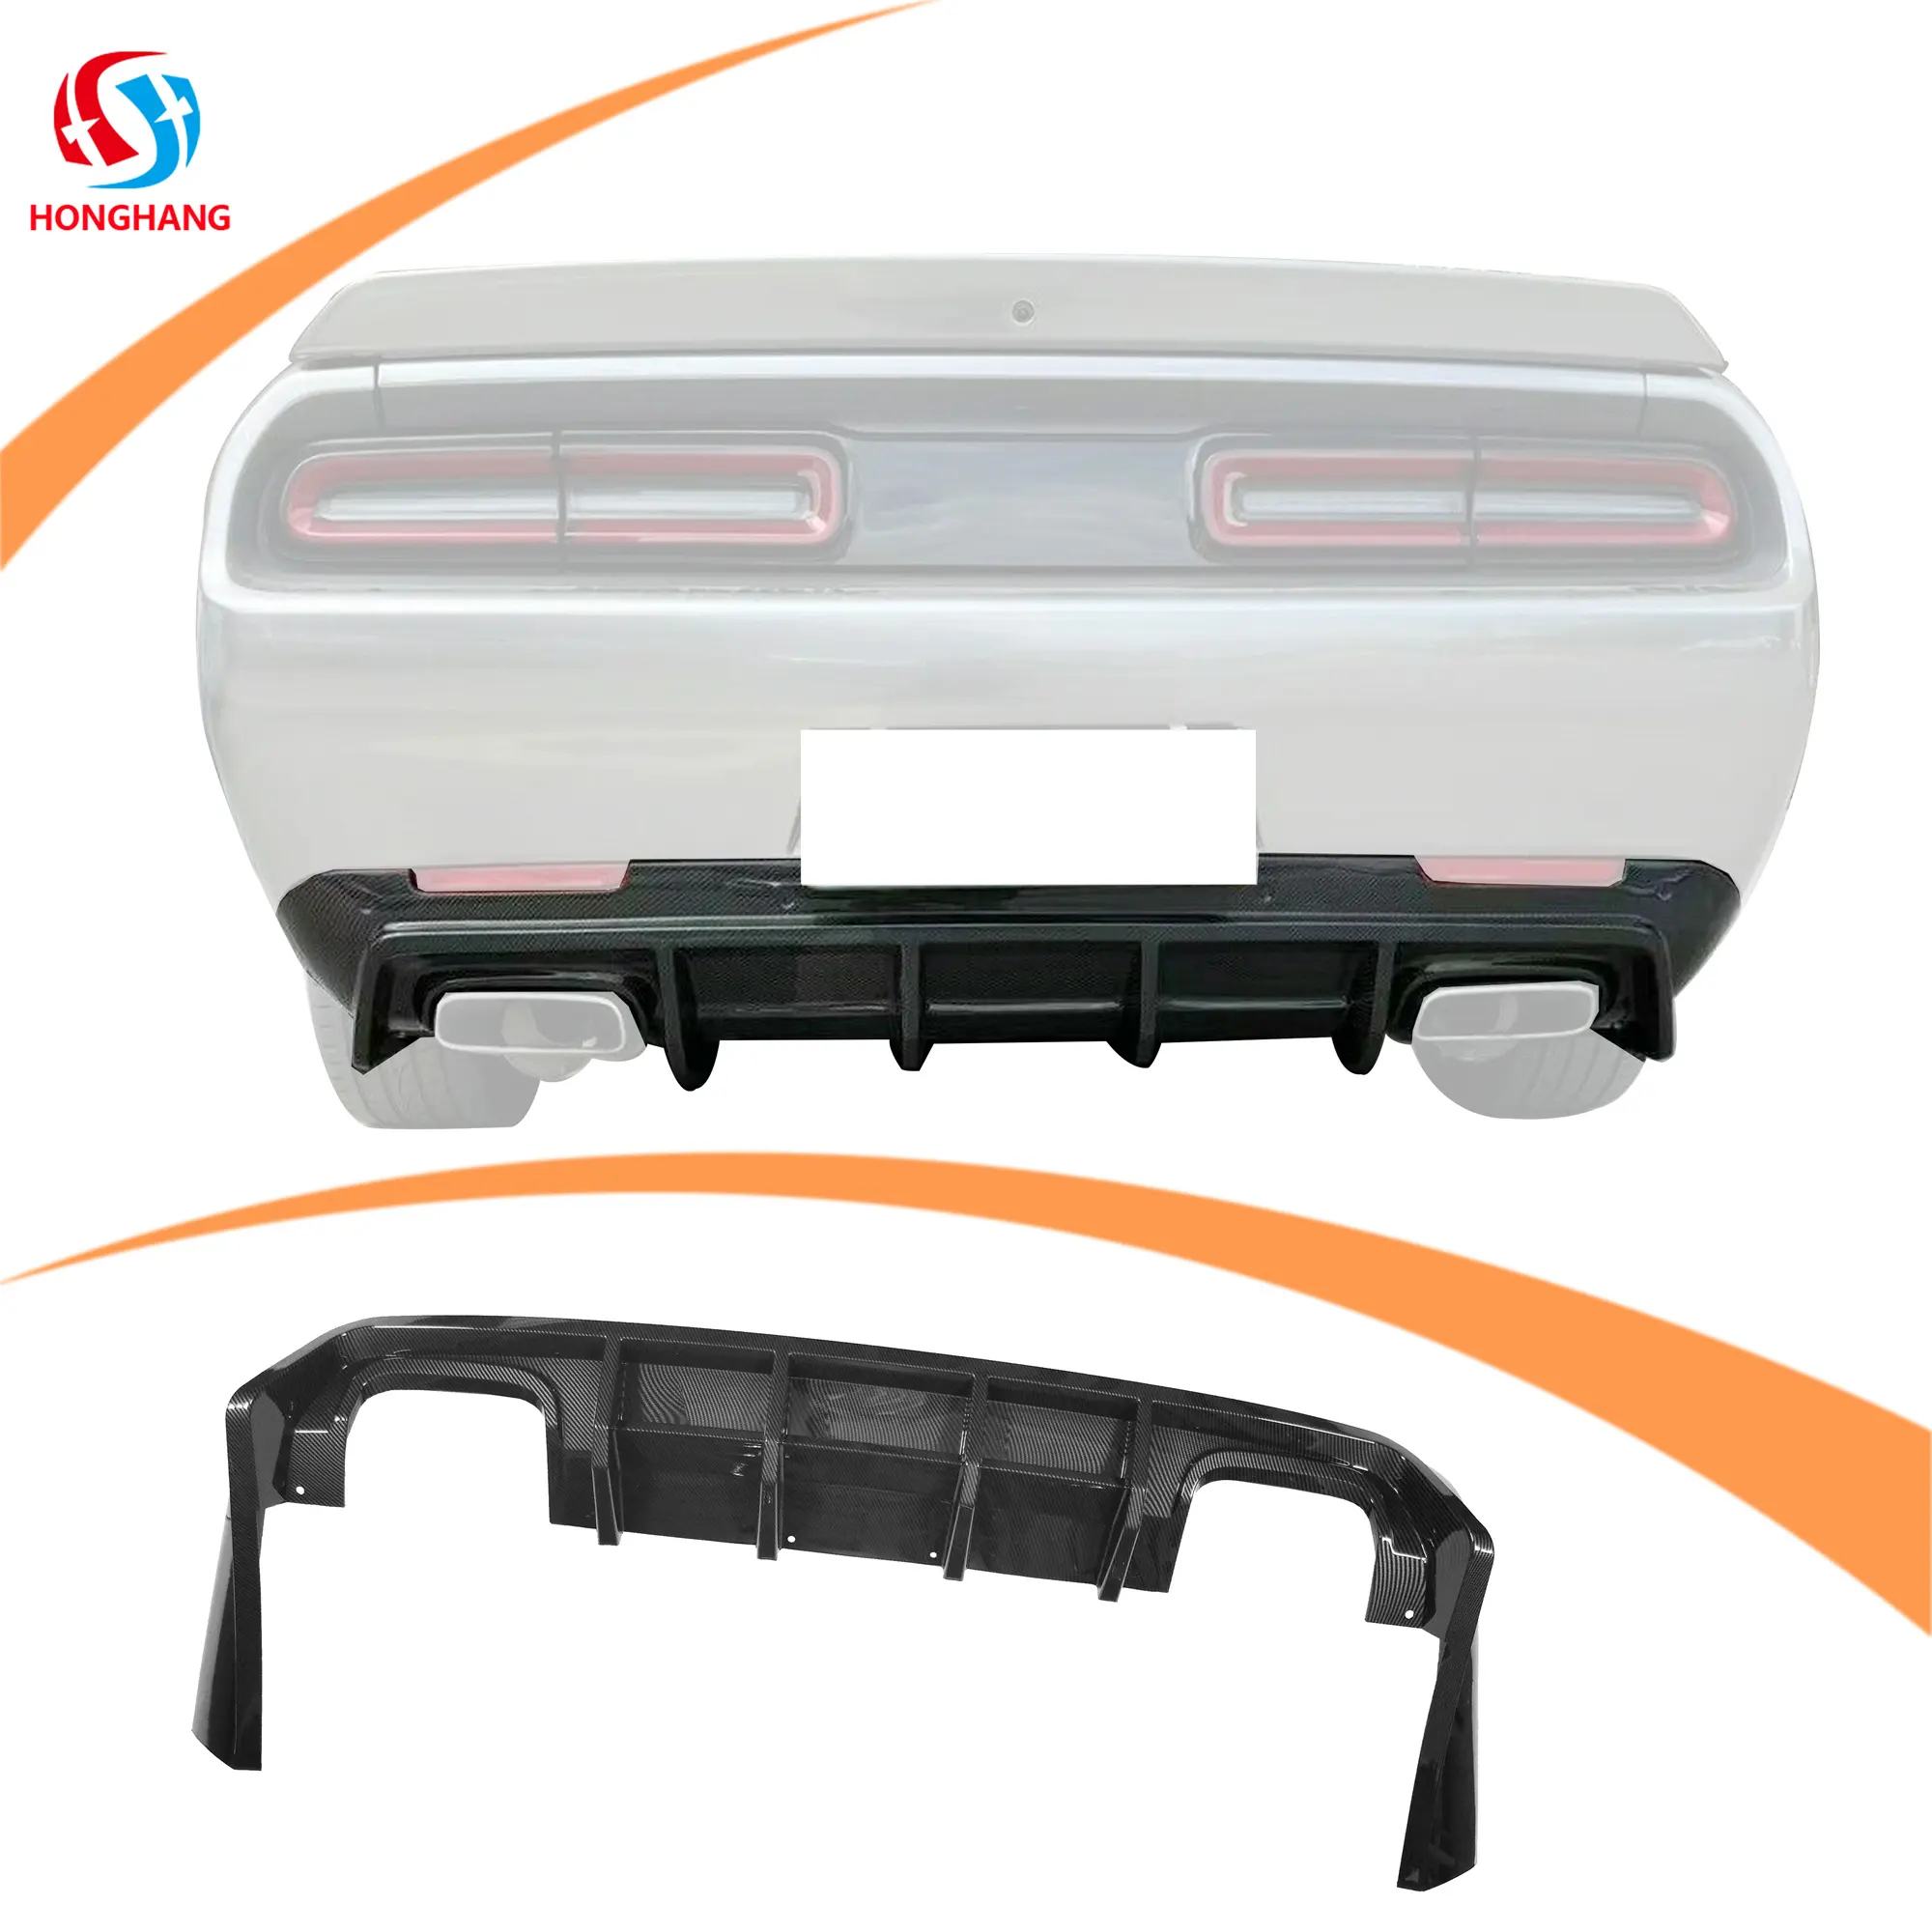 Honghang Factory Car Decoration Accessories Rear Bumper Diffuser Manufacture ABS Lip for Dodge Challenger Accessories 2015-202